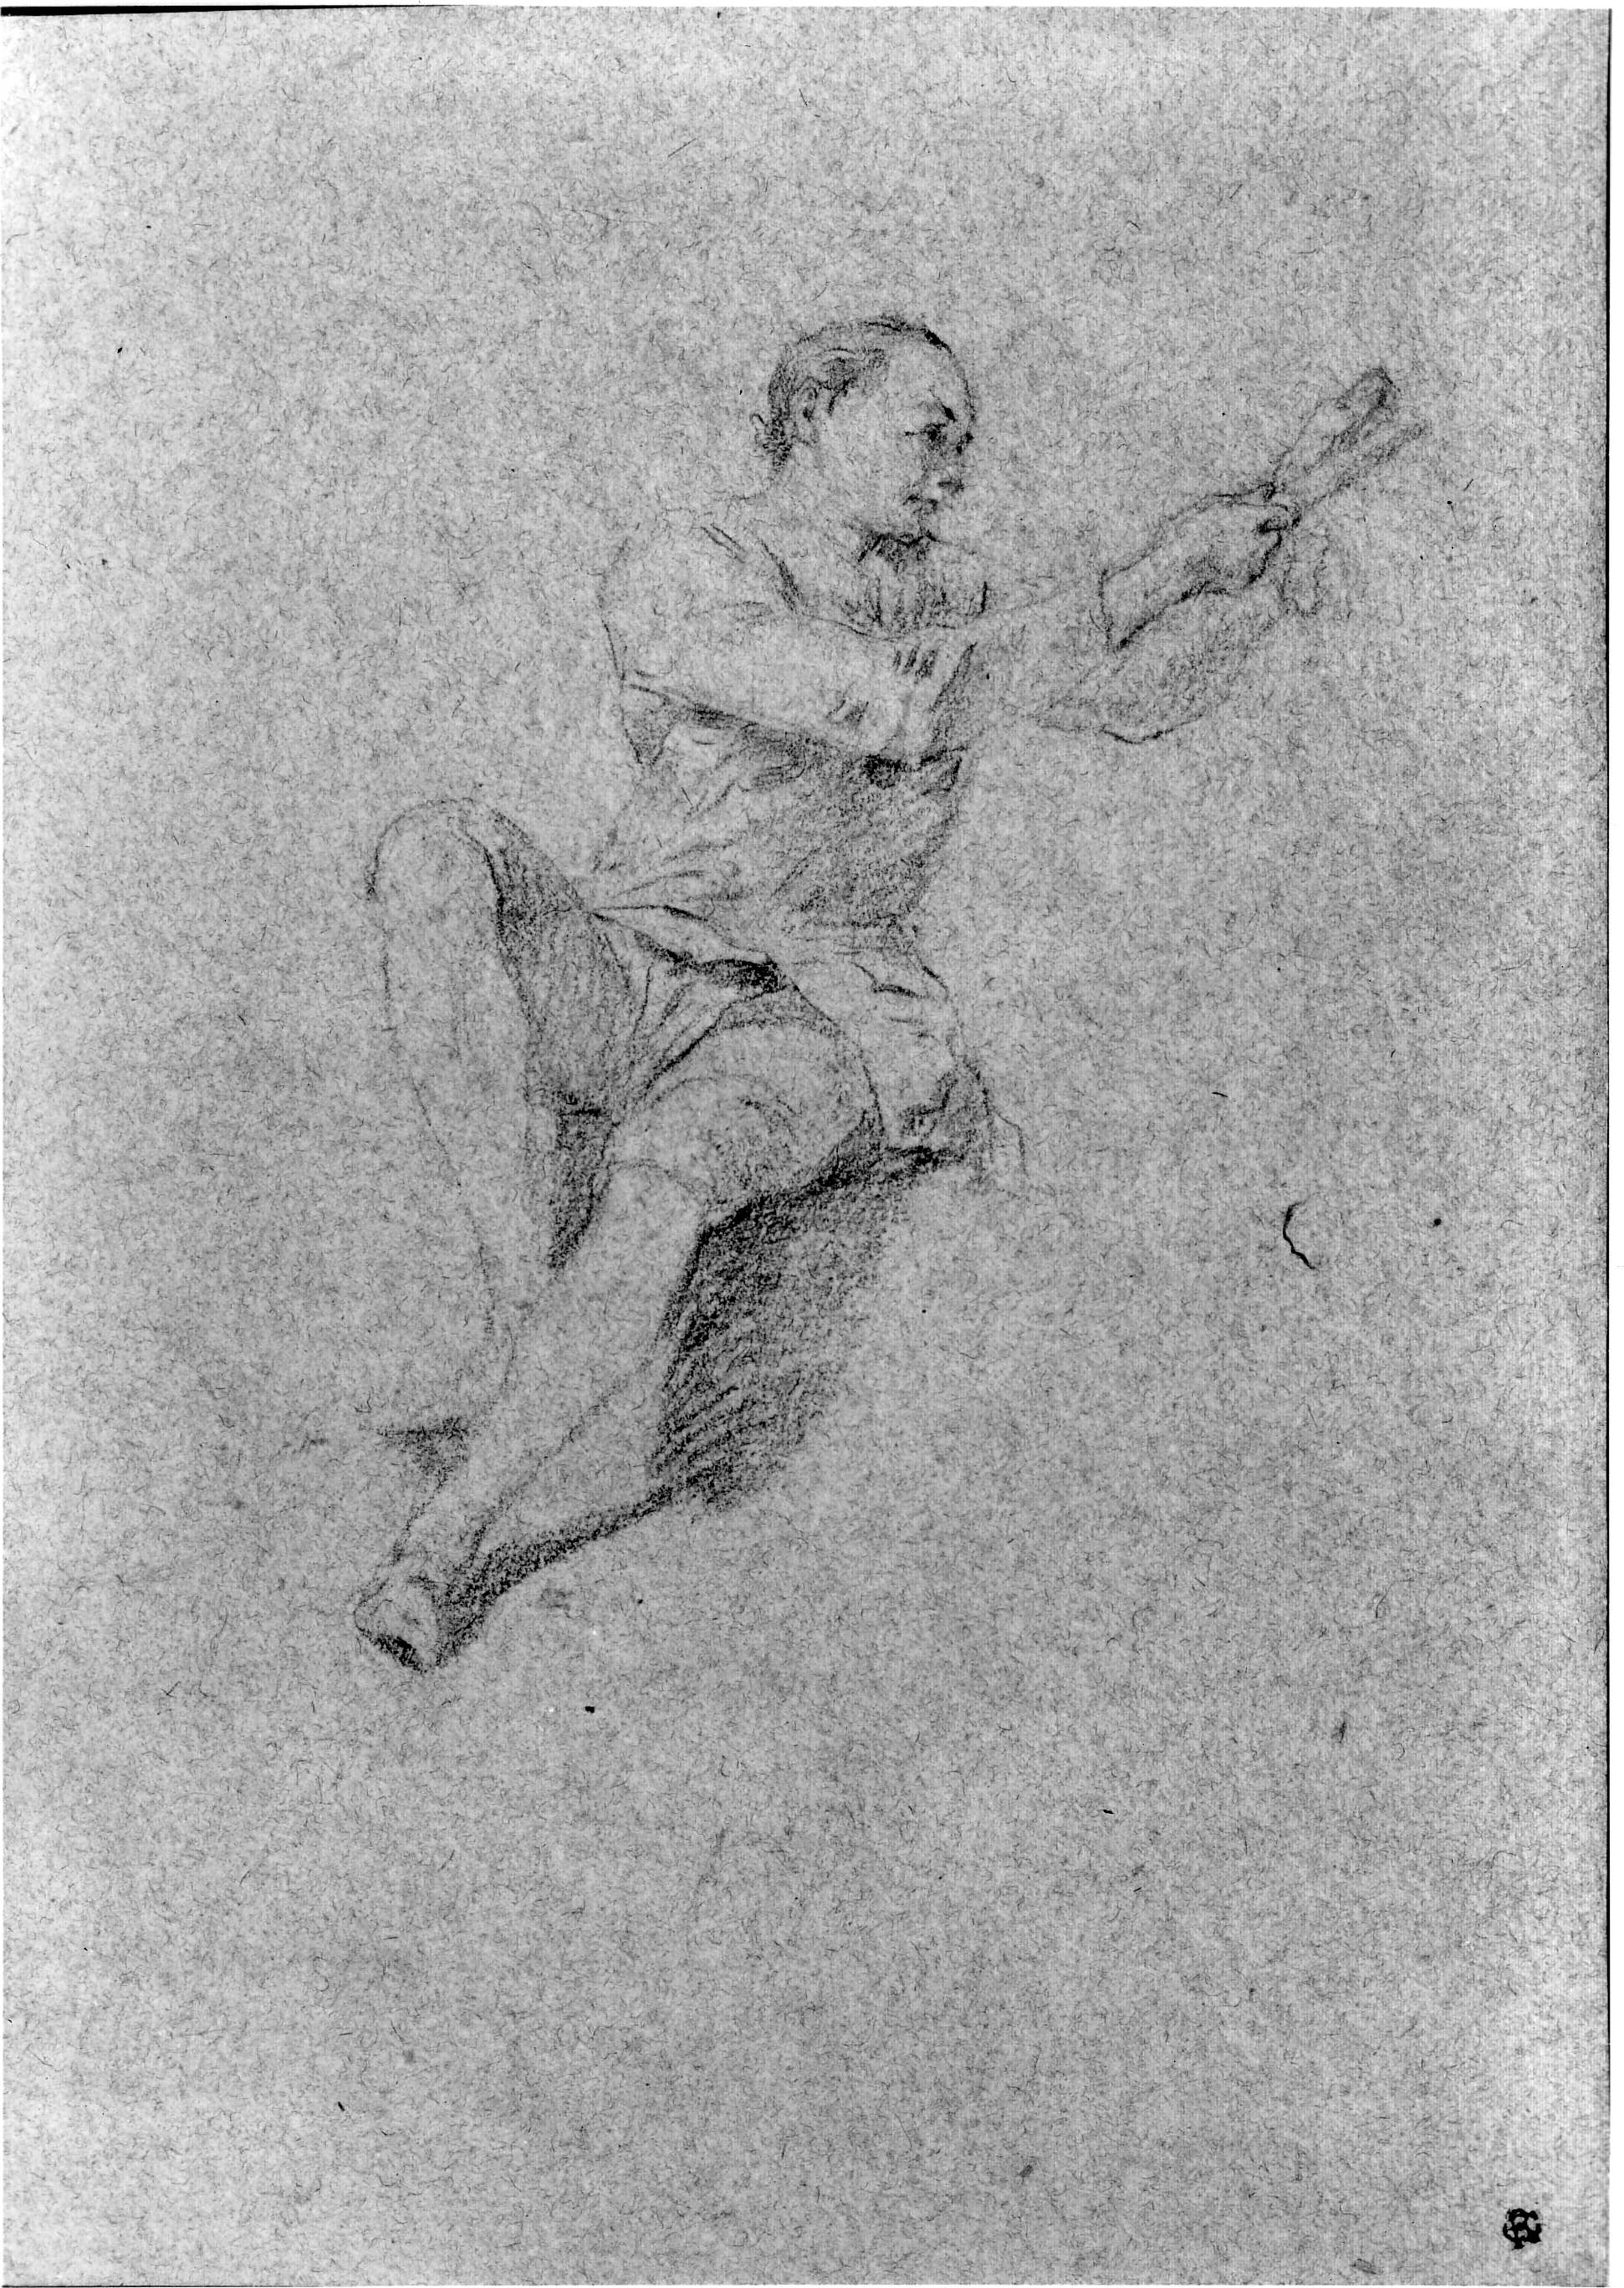 12. Michel Barthélemy Ollivier, Seated Male Figure, 19.2 x 13.2 cm, red and black chalk on blue paper. San Francisco Museums of Fine Arts, George de Batz collection.